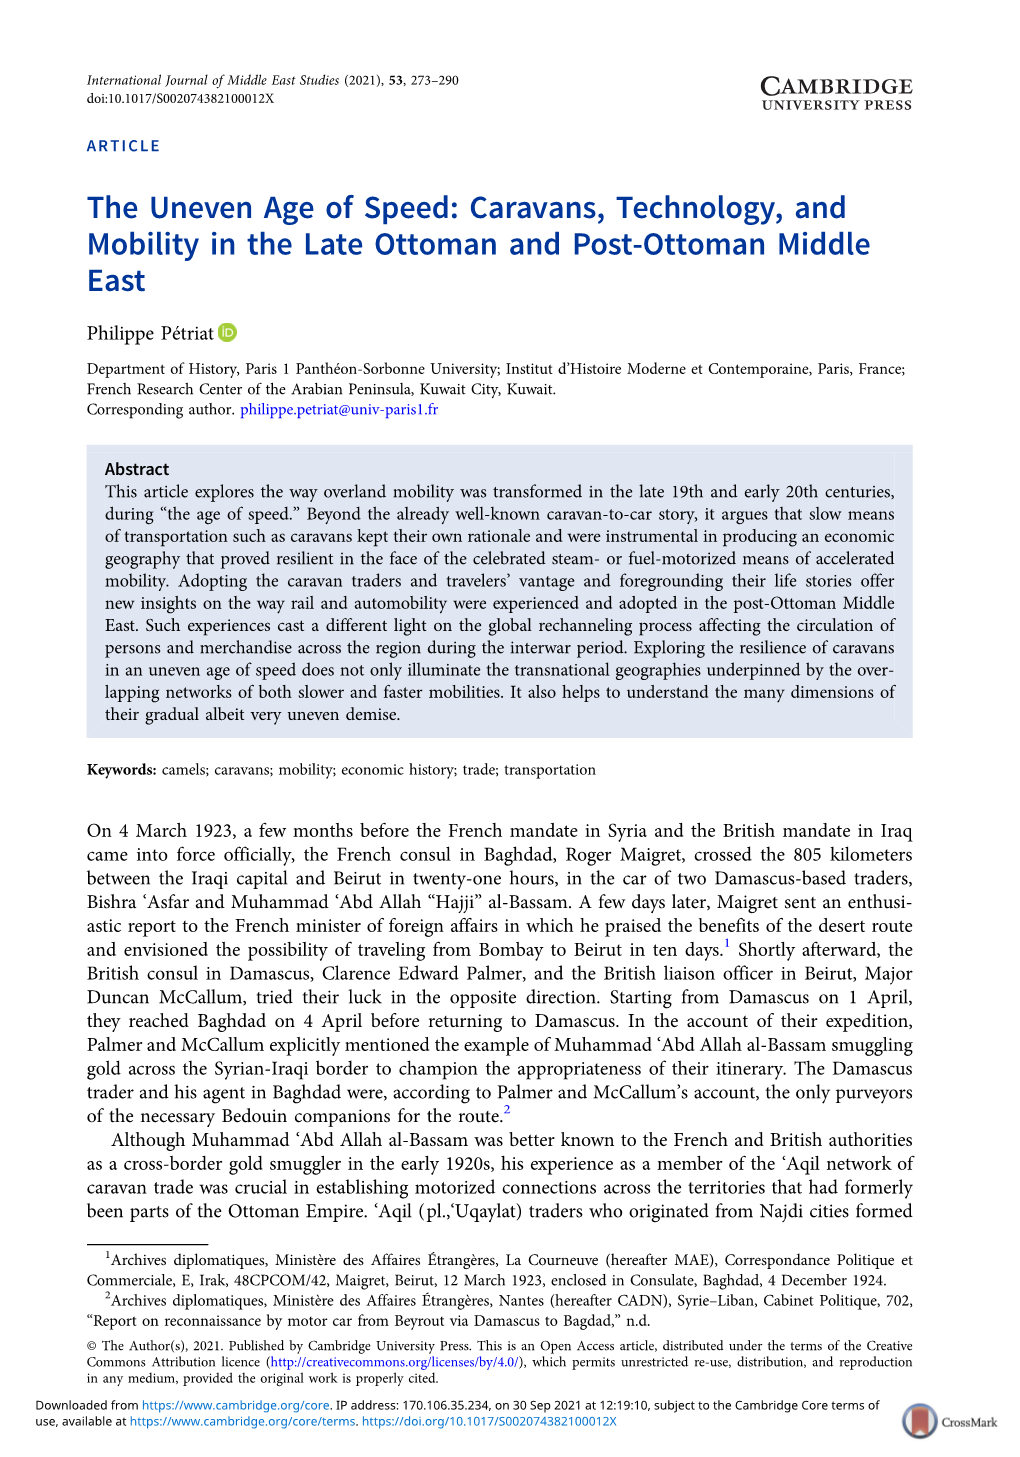 The Uneven Age of Speed: Caravans, Technology, and Mobility in the Late Ottoman and Post-Ottoman Middle East